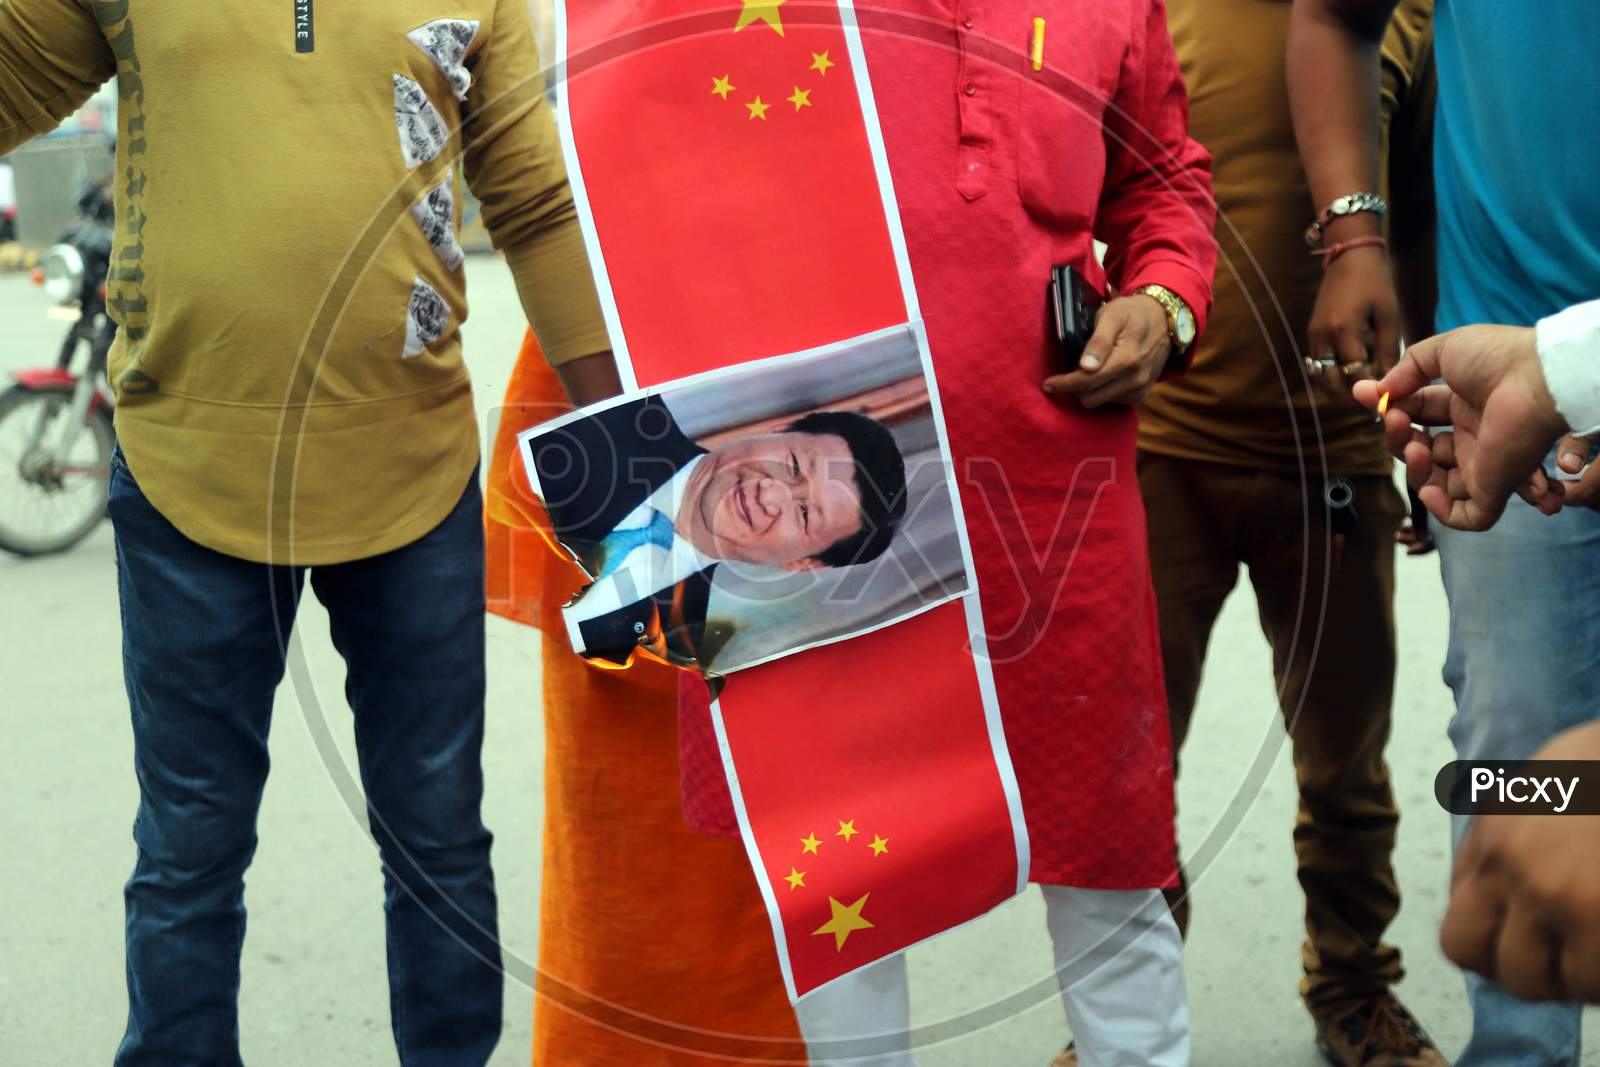 Supporters Of Bharatiya Jayanta Party (Bjp) Burn Posters Of China's President Xi Jinping During A Protest Against China in Prayagraj on June 17, 2020 after a violent face off between Indian Army and Chinese PLA in Galwan Valley.